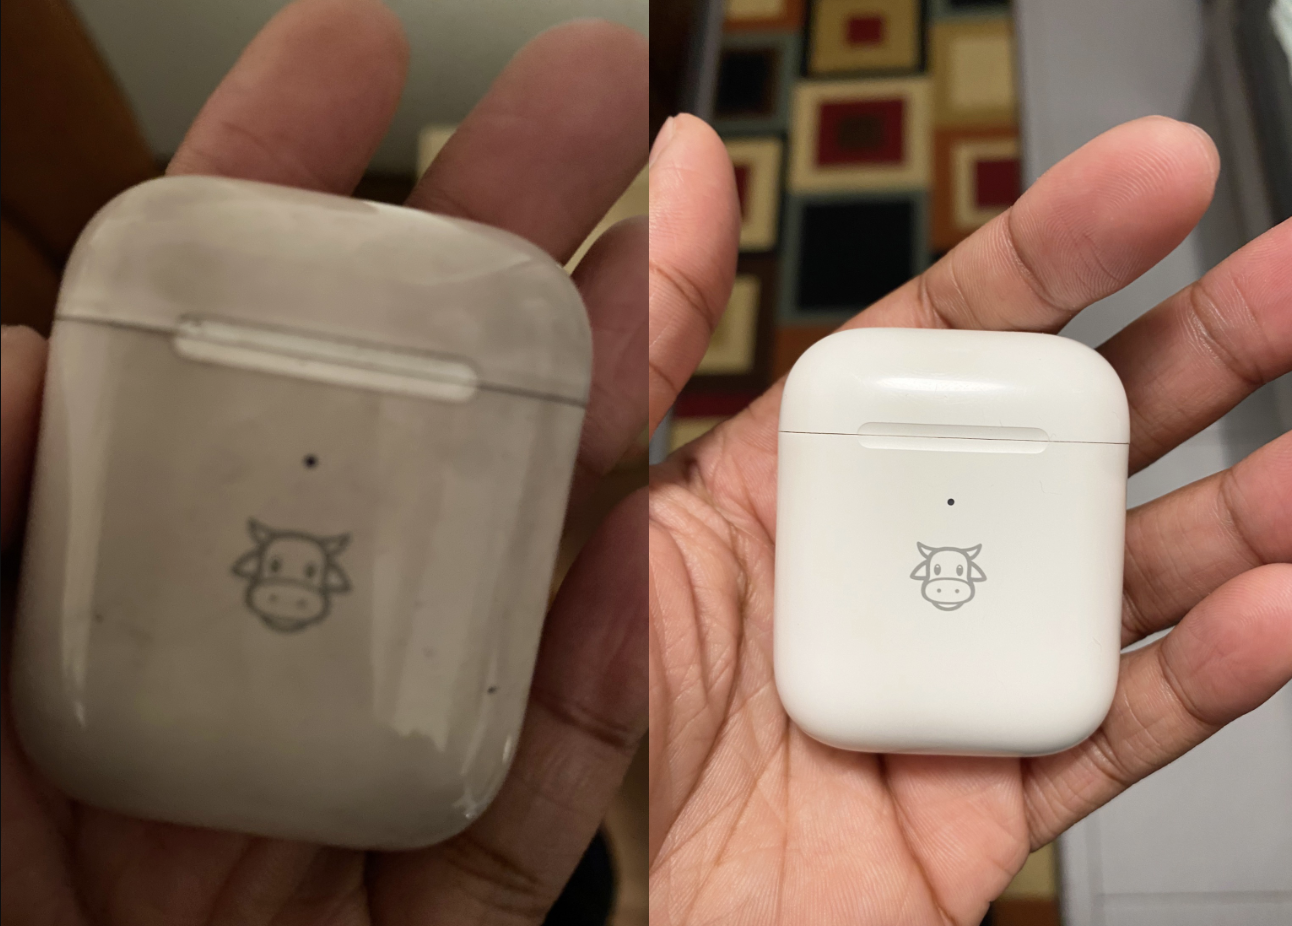 reviewer pic of dirty Airpod case and then the same one clean and looking brand new